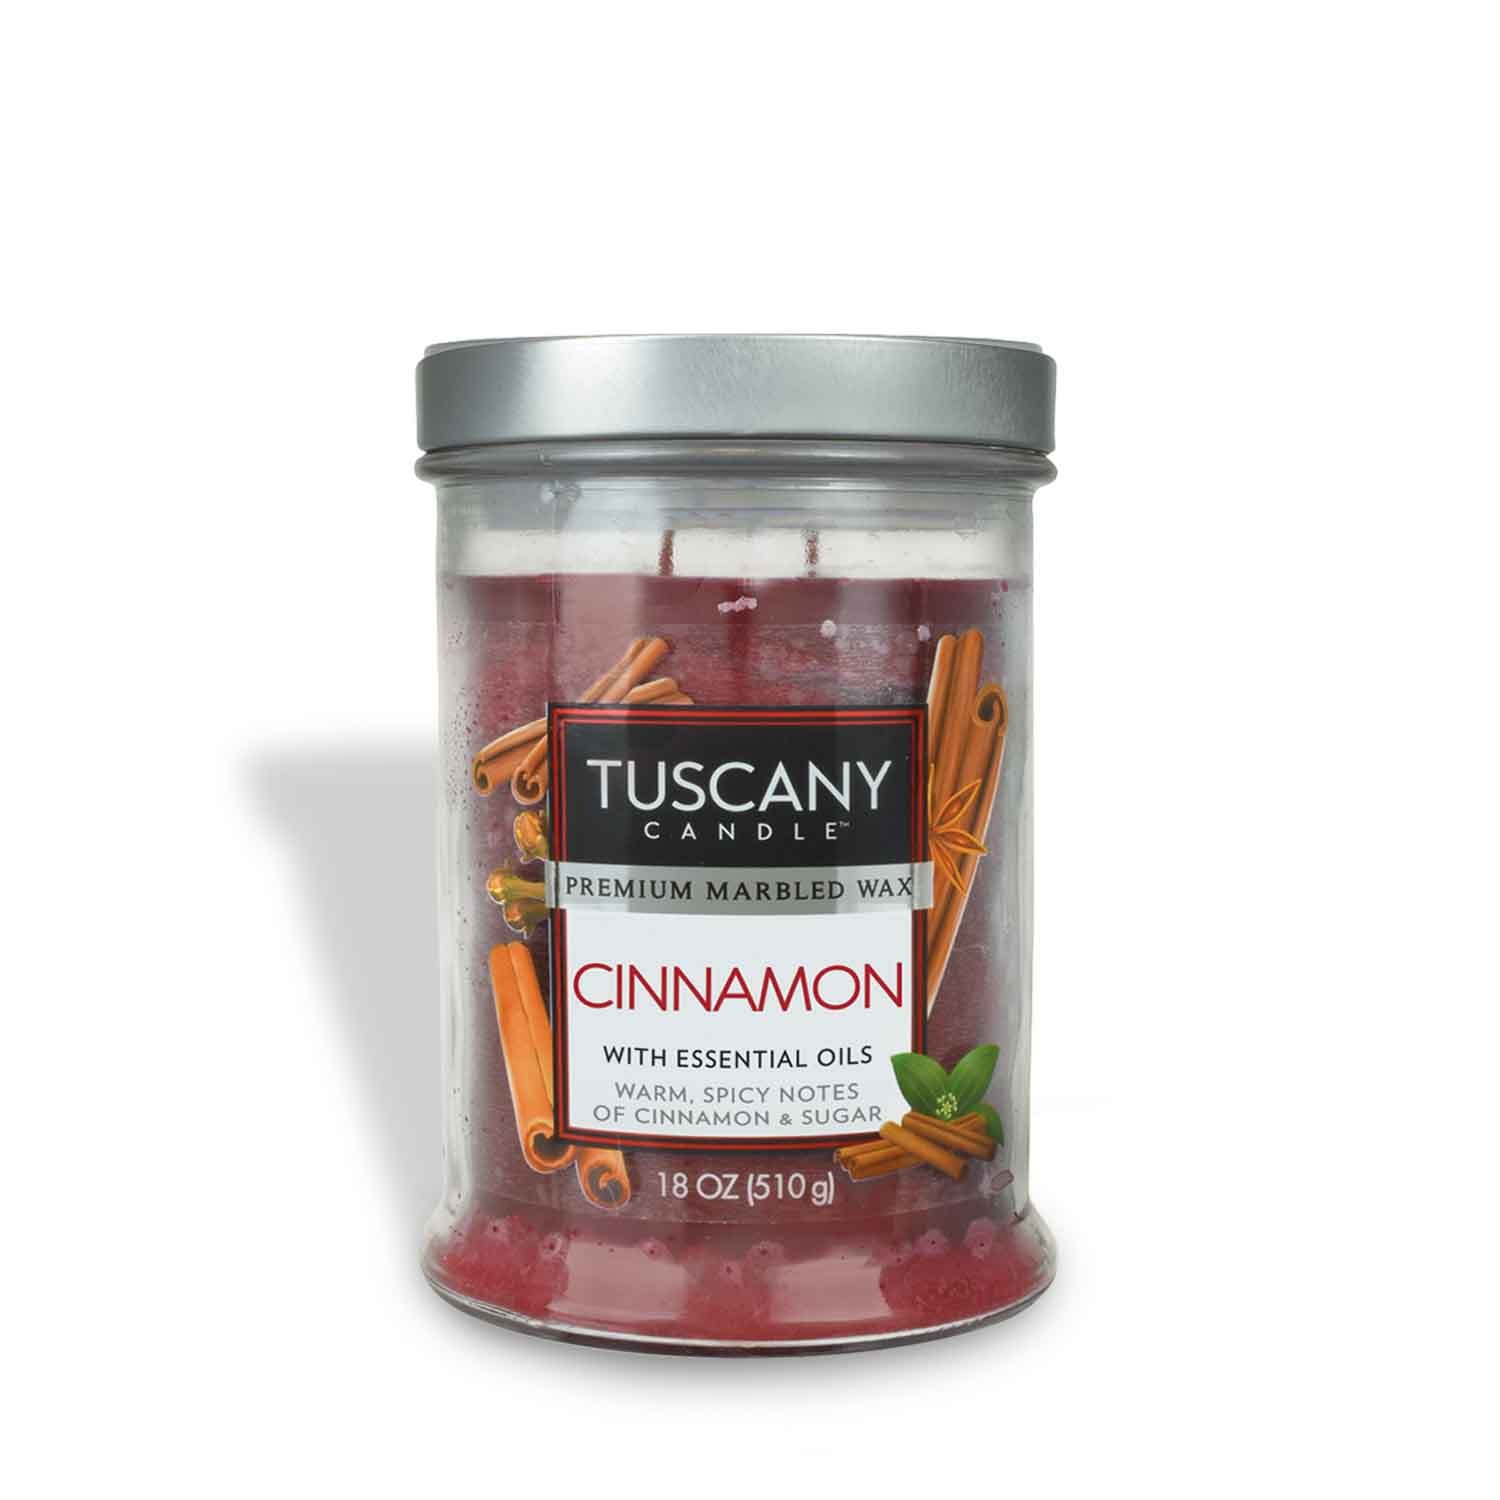 Tuscany Candle's Cinnamon Long-Lasting Scented Jar Candle (18 oz) is perfect for relaxation and tranquility.